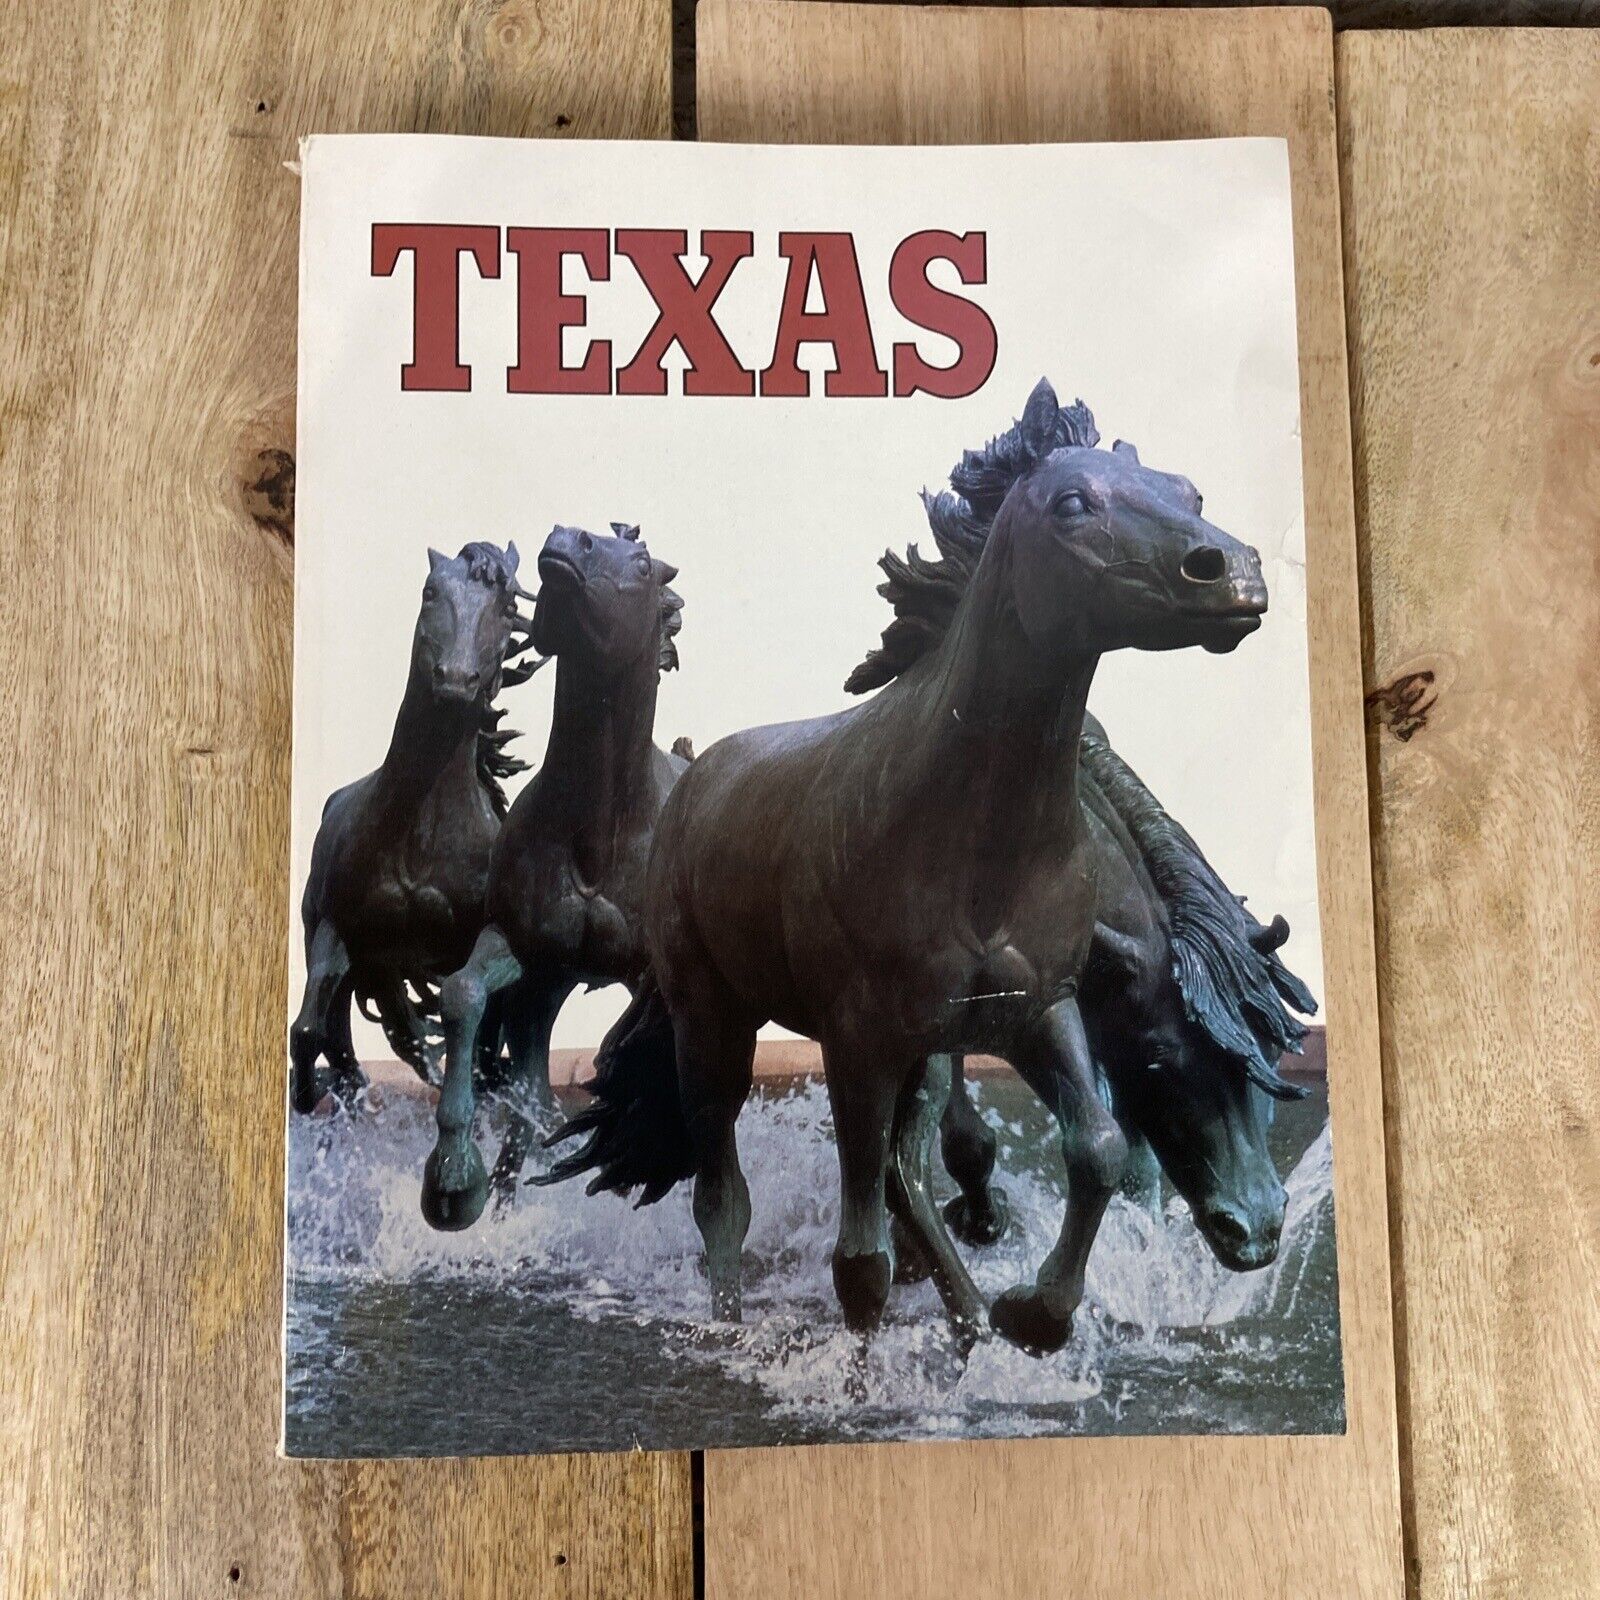 Vintage Texas State Travel Guide Paperback Texas Department of Transportation